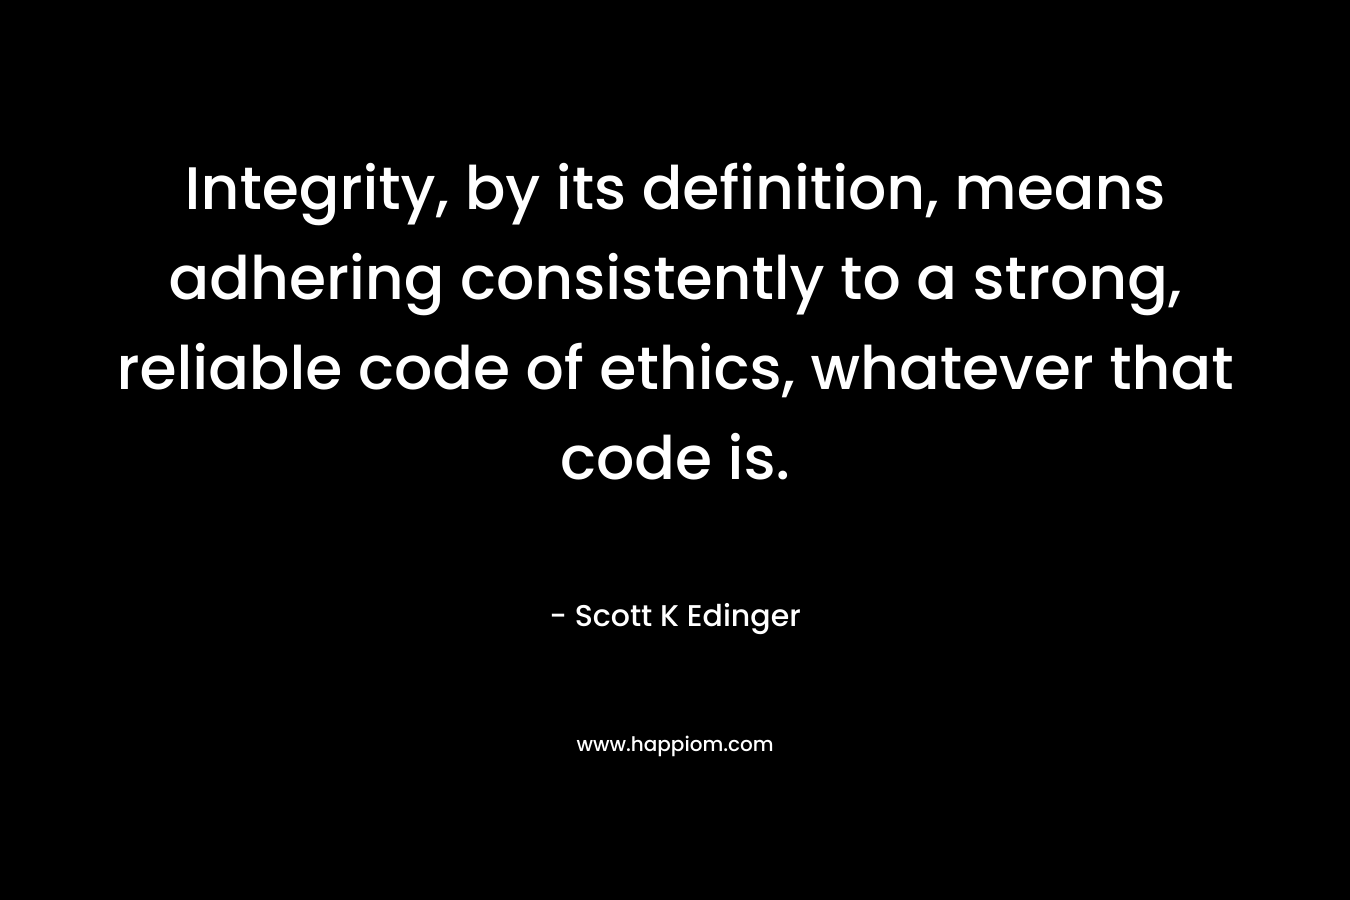 Integrity, by its definition, means adhering consistently to a strong, reliable code of ethics, whatever that code is.